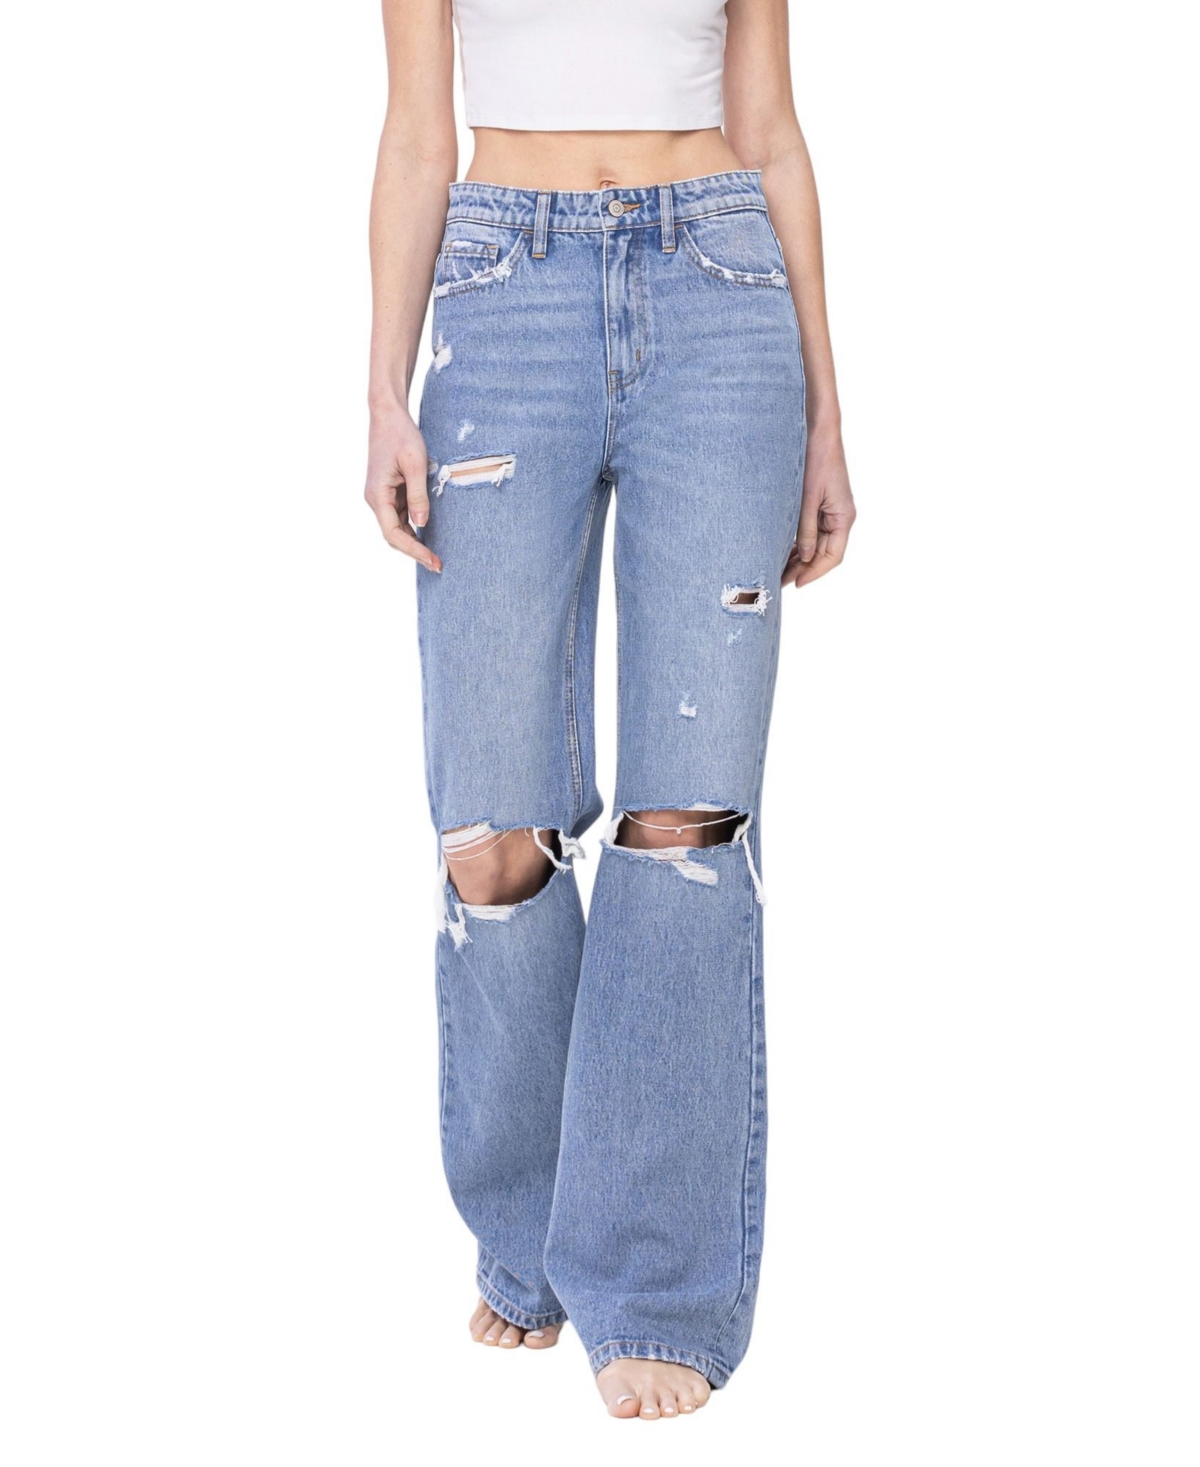 Women's Super High Rise 90'S Vintage-like Flare Jeans - Fearless blue